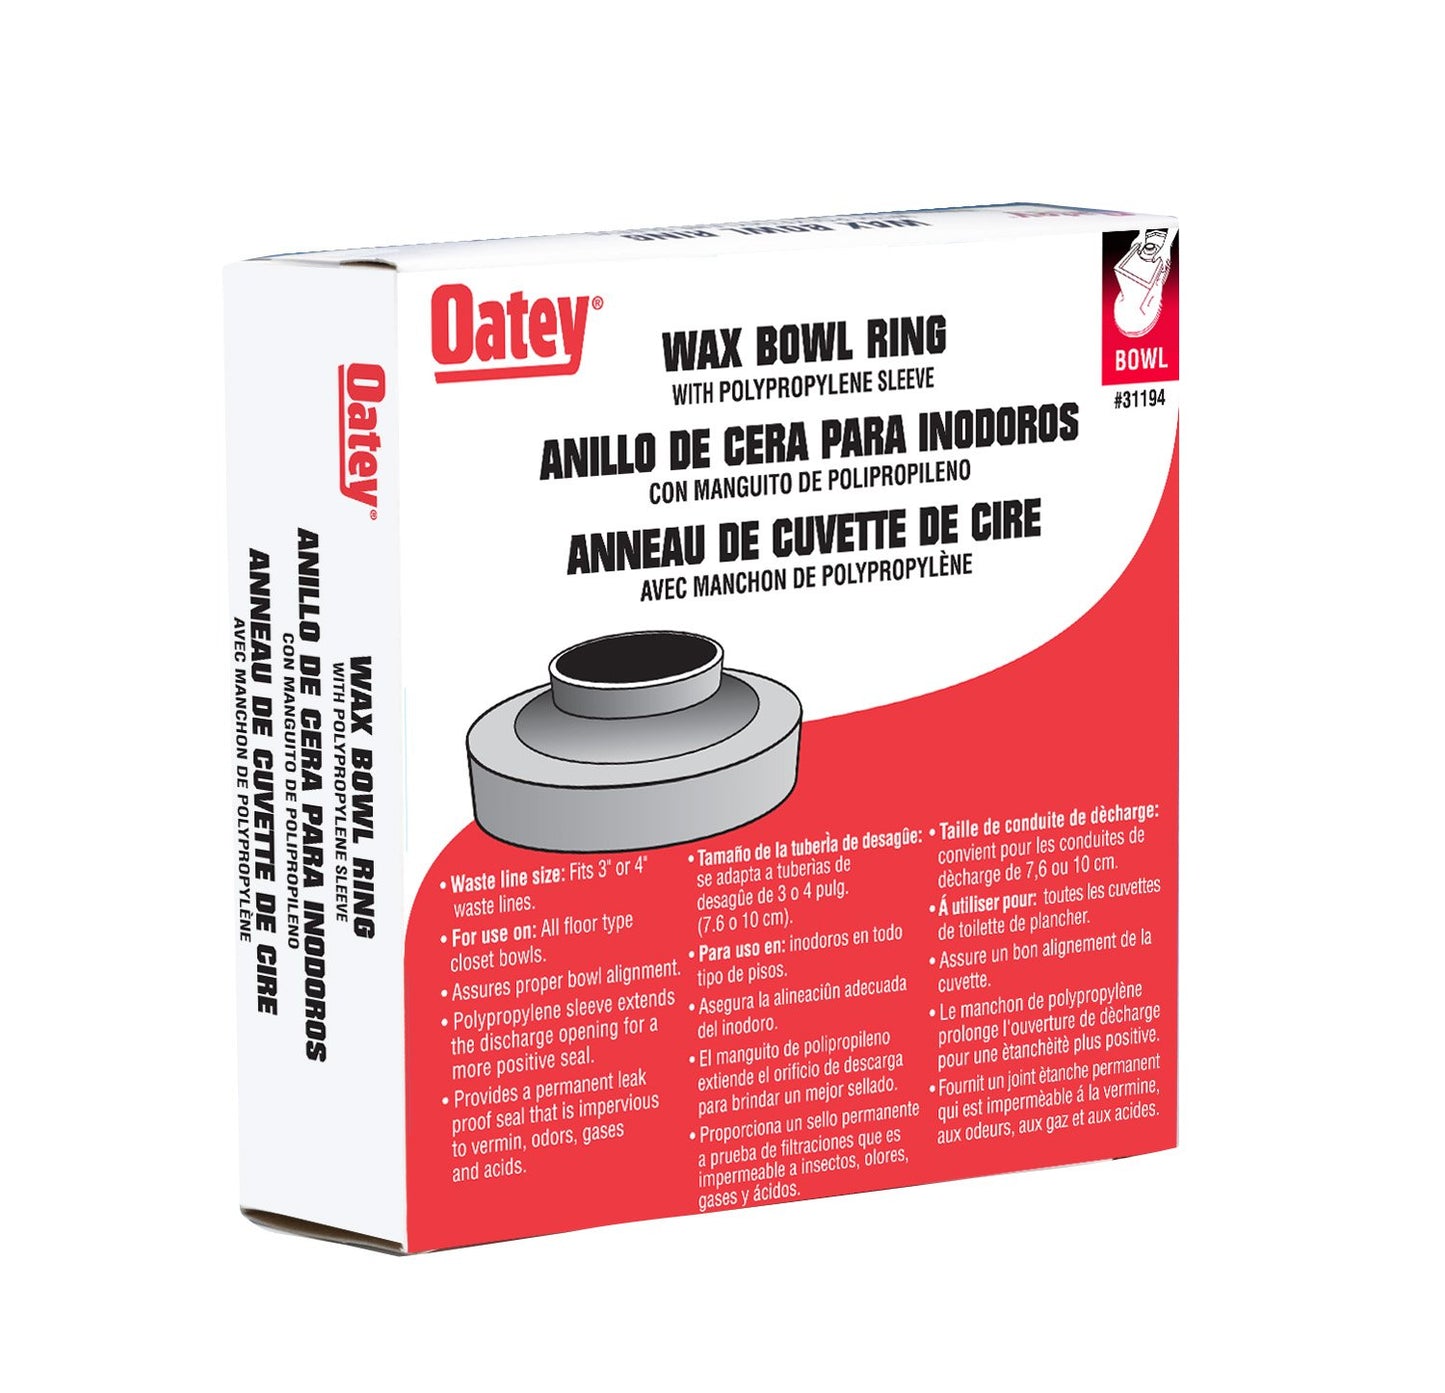 Oatey 31194, Small - Opticdeals